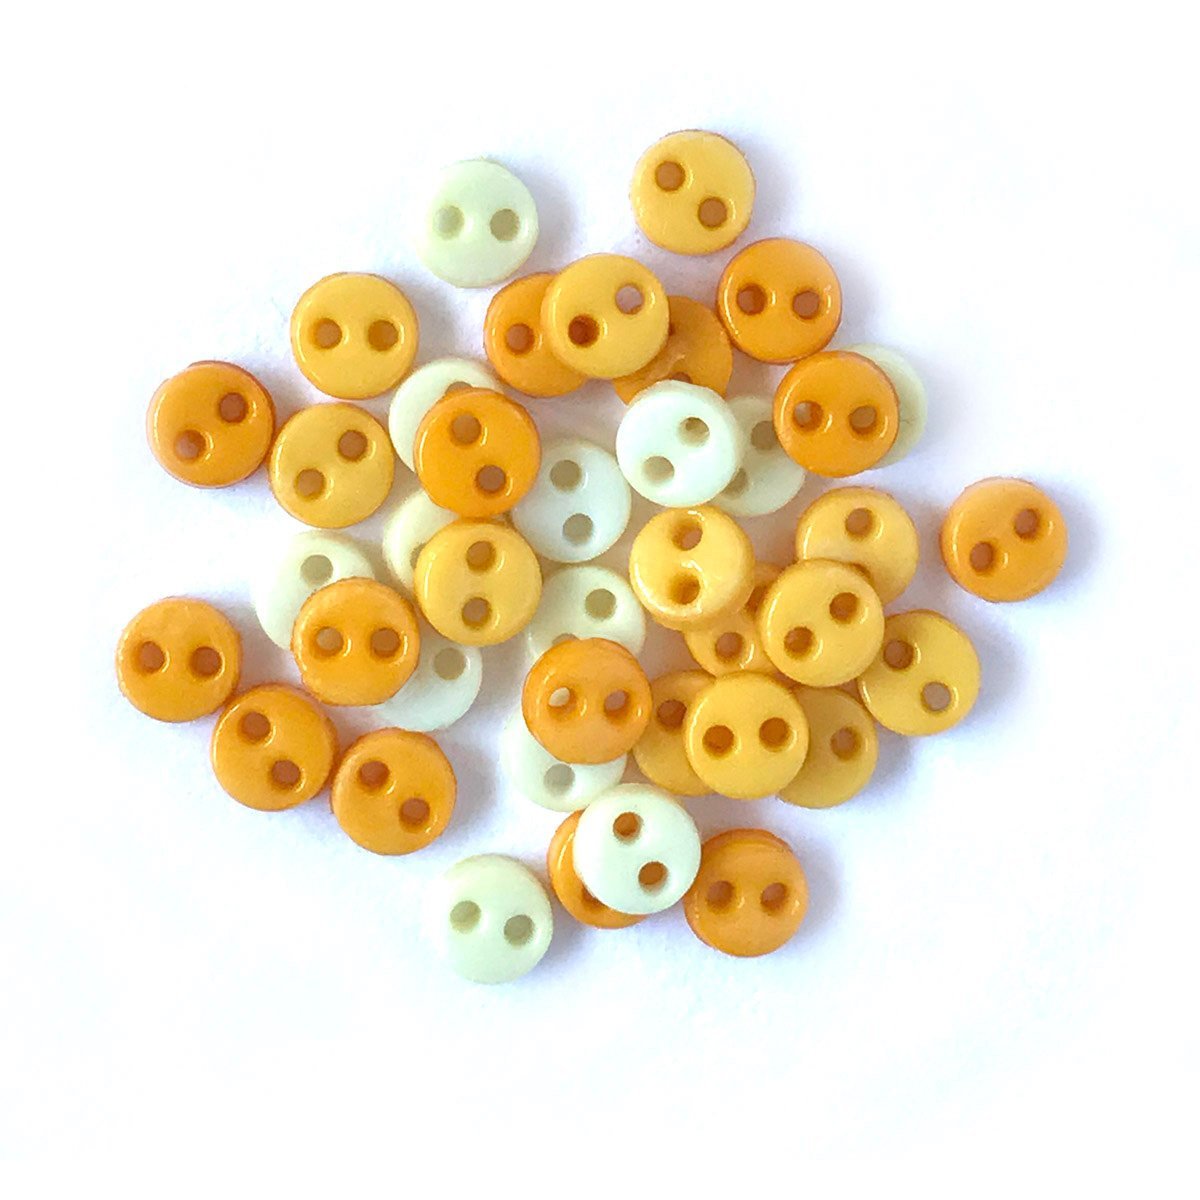 50 Pcs 4 mm Doll Buttons - Micro Buttons - Miniature Tiny Buttons